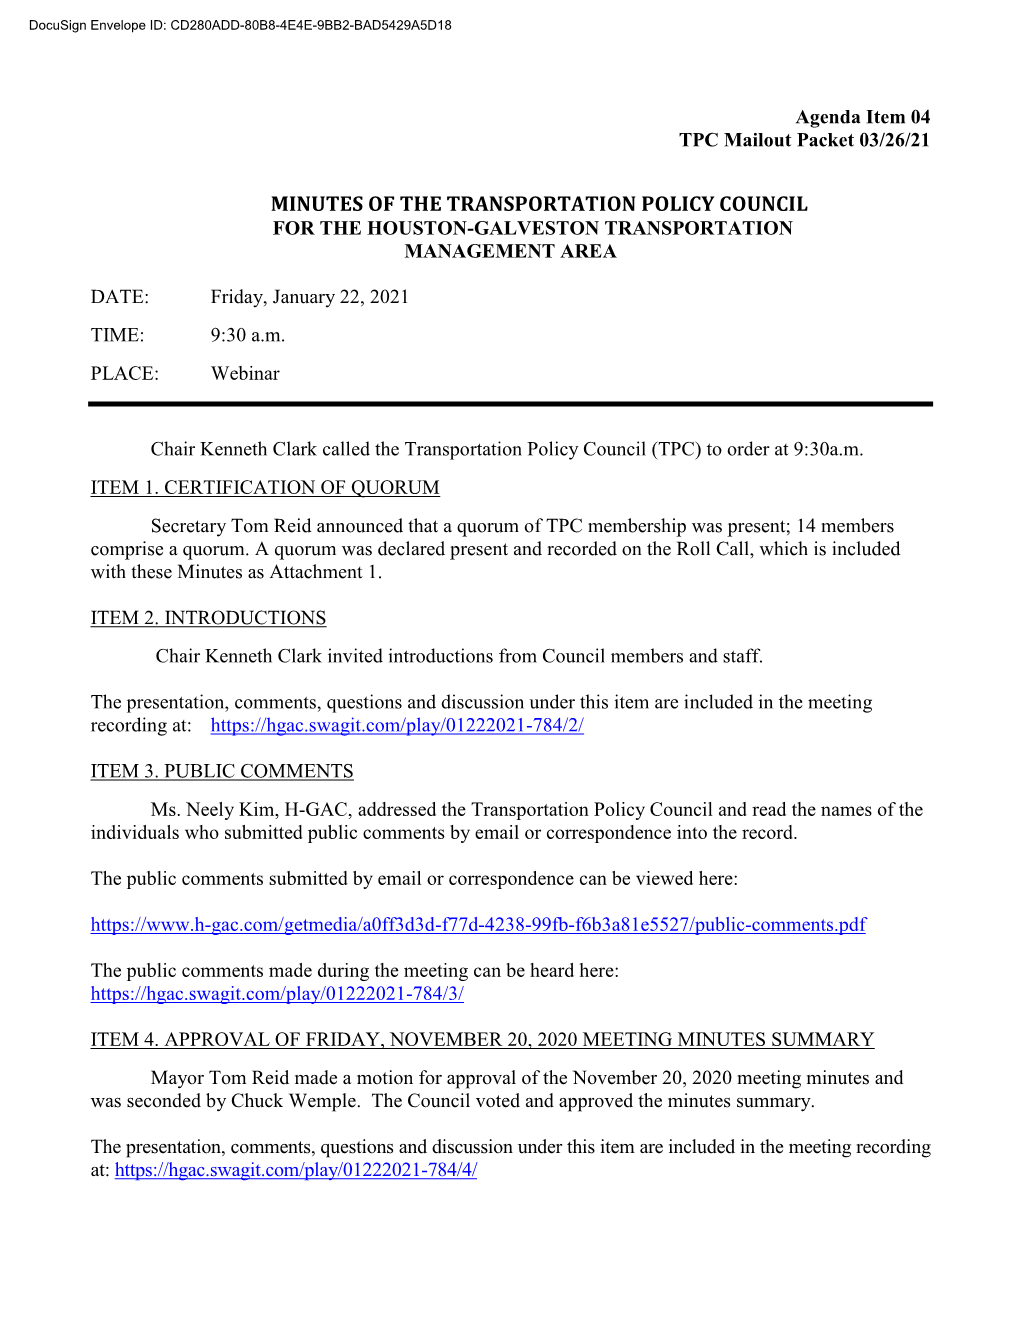 Minutes of the Transportation Policy Council for the Houston-Galveston Transportation Management Area